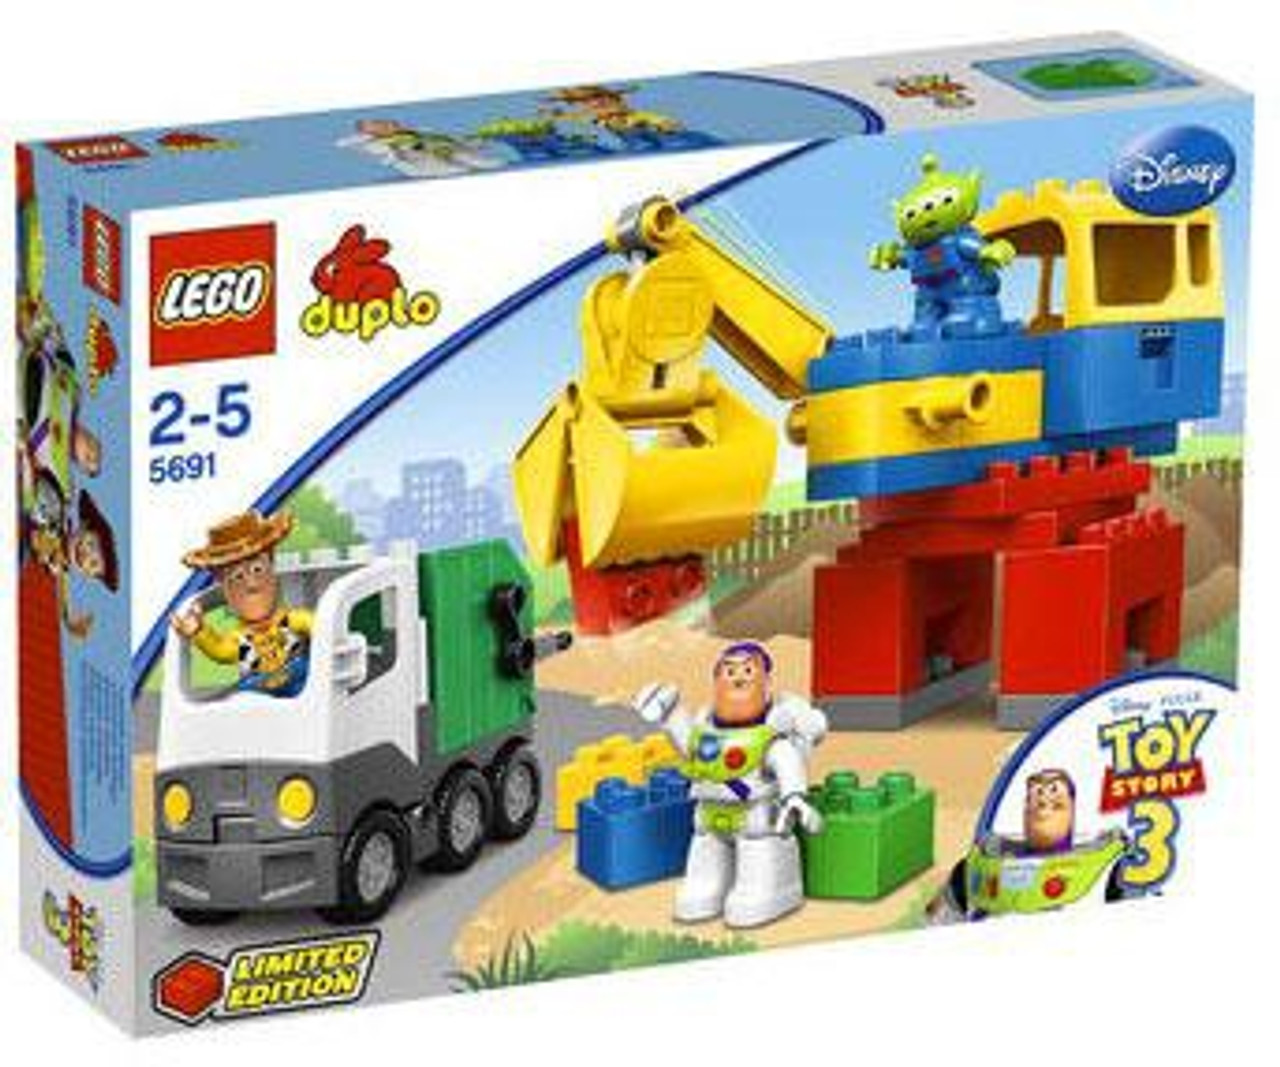 toy story 3 dump truck